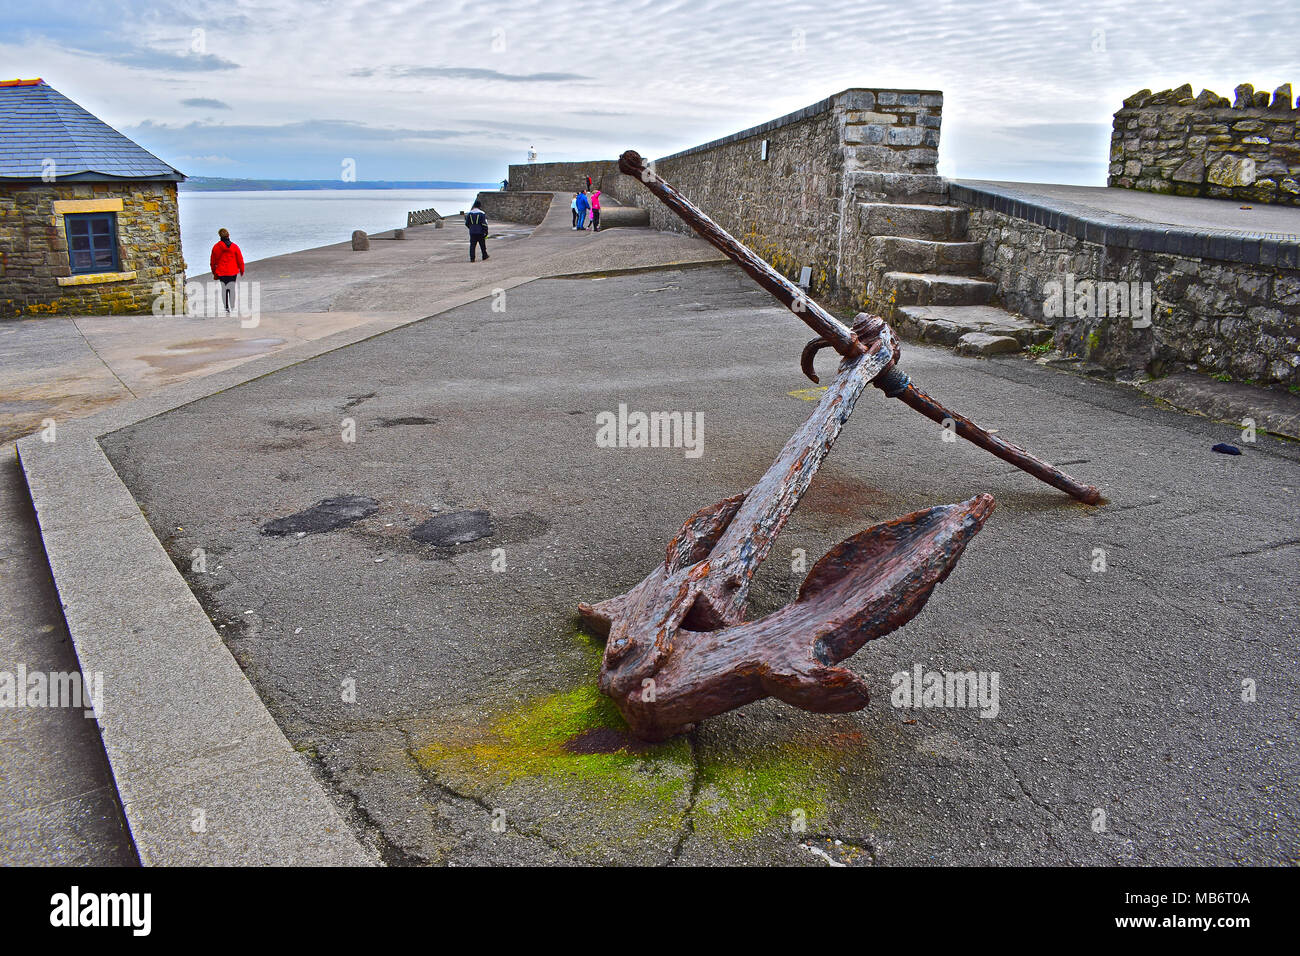 Old anchor with people strolling behind the high solid stone wall which forms the Porthcawl Harbour breakwater with the iconic lighthouse in distance. Stock Photo